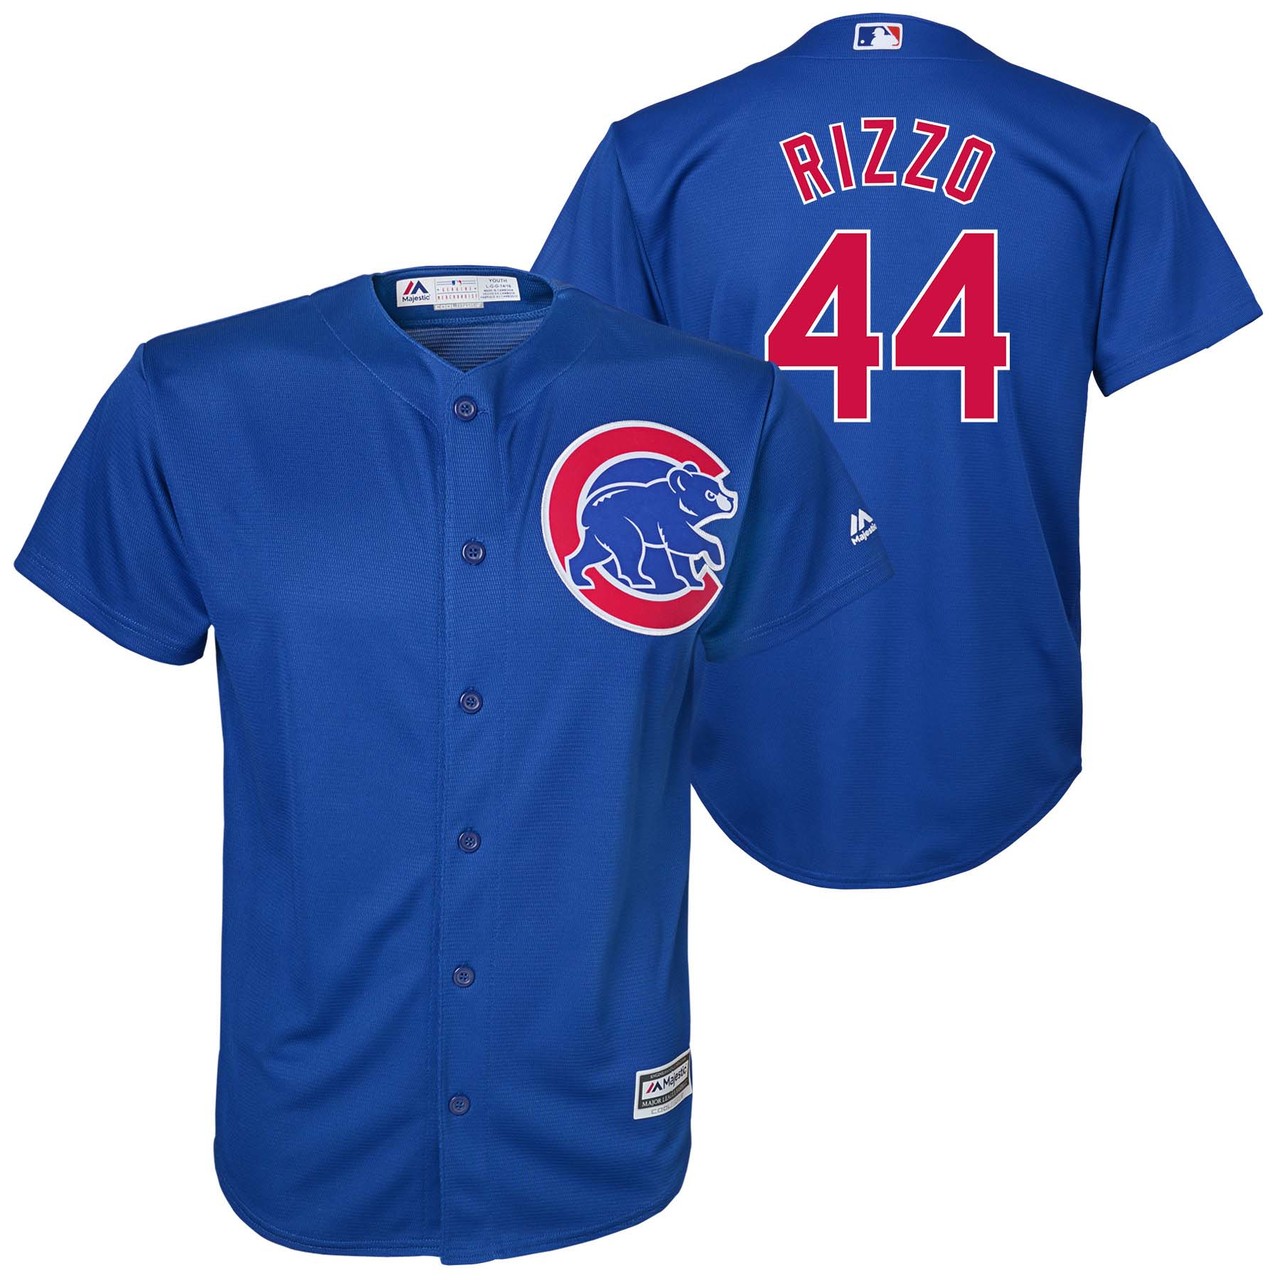 youth anthony rizzo jersey